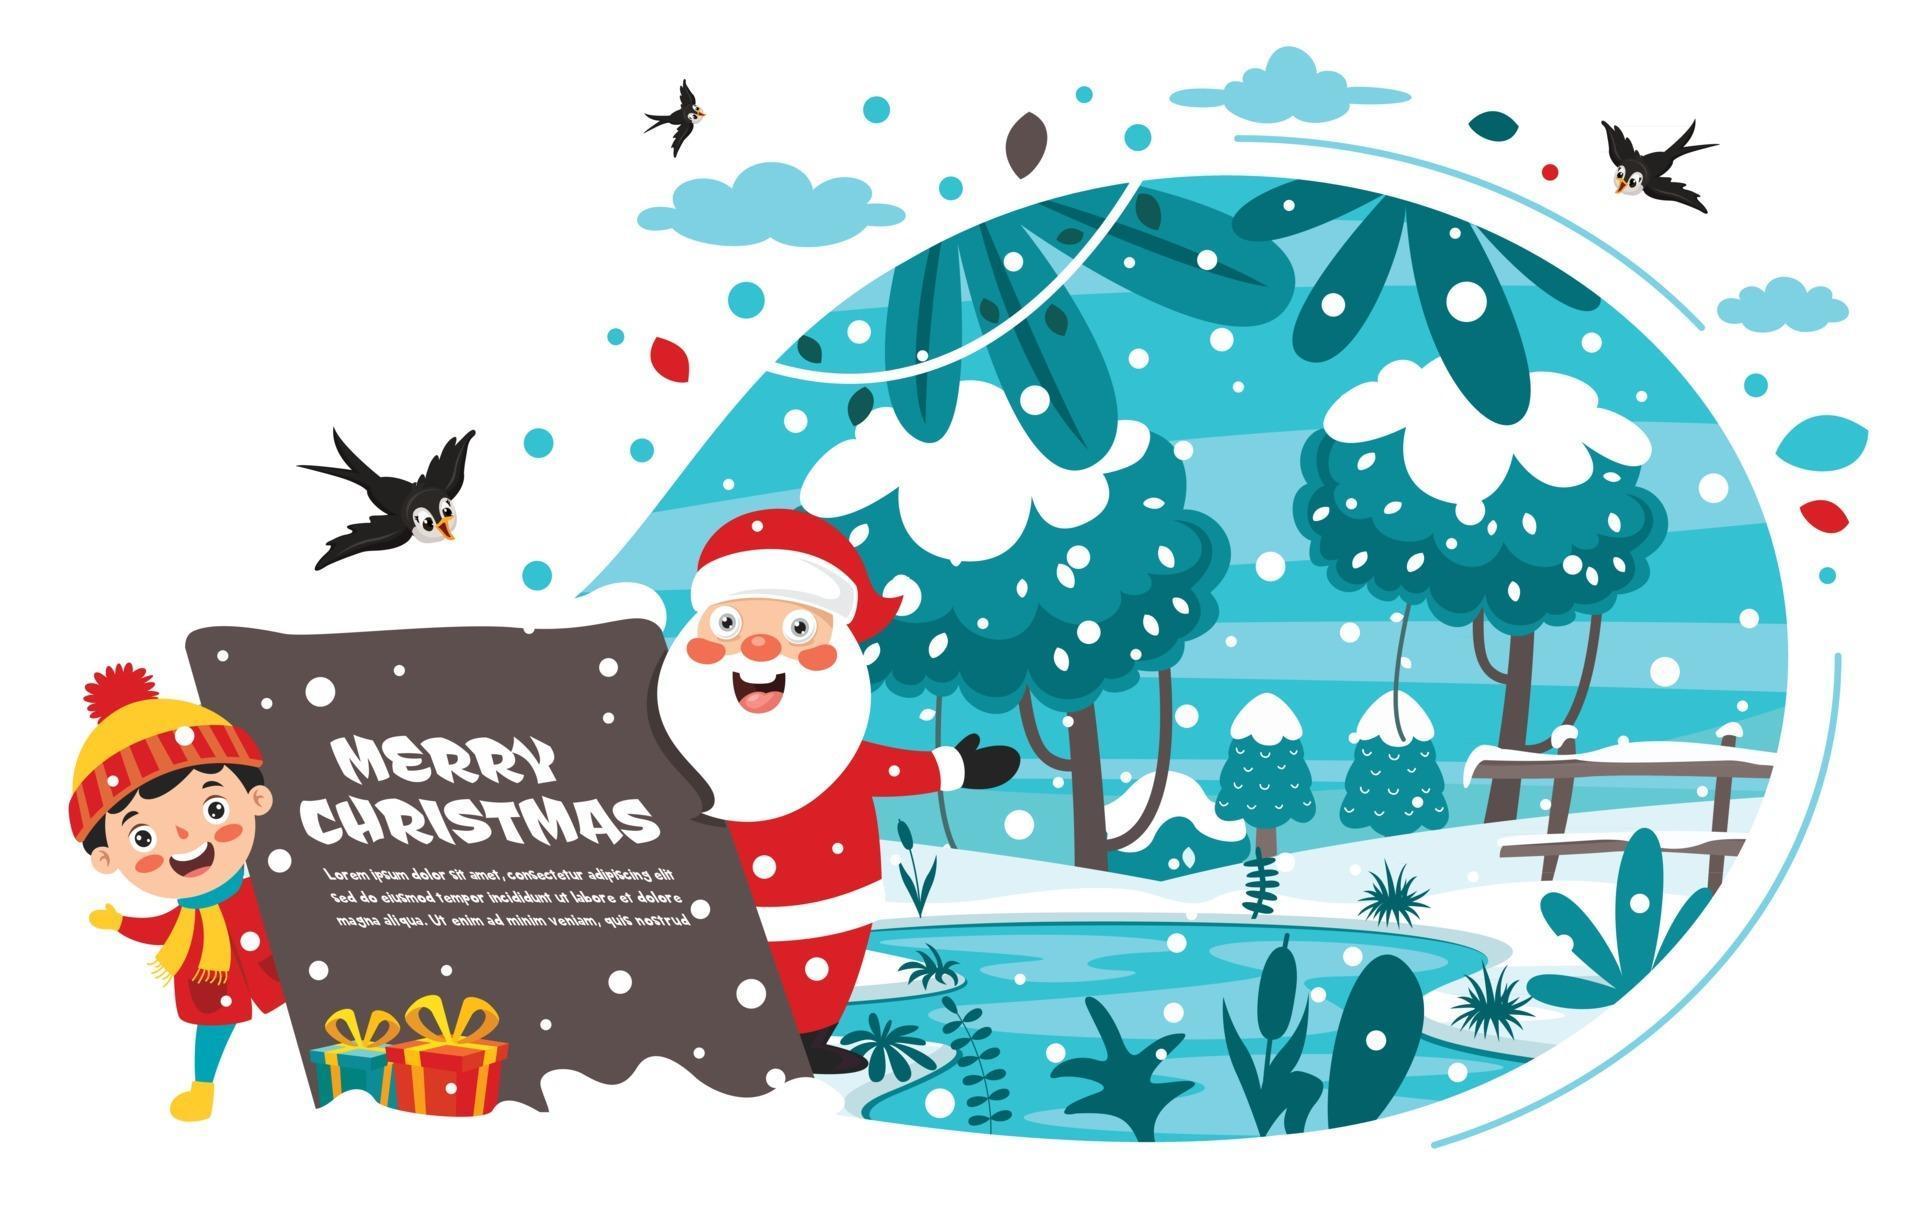 Christmas Greeting Card Design With Cartoon Characters 2394095 Vector